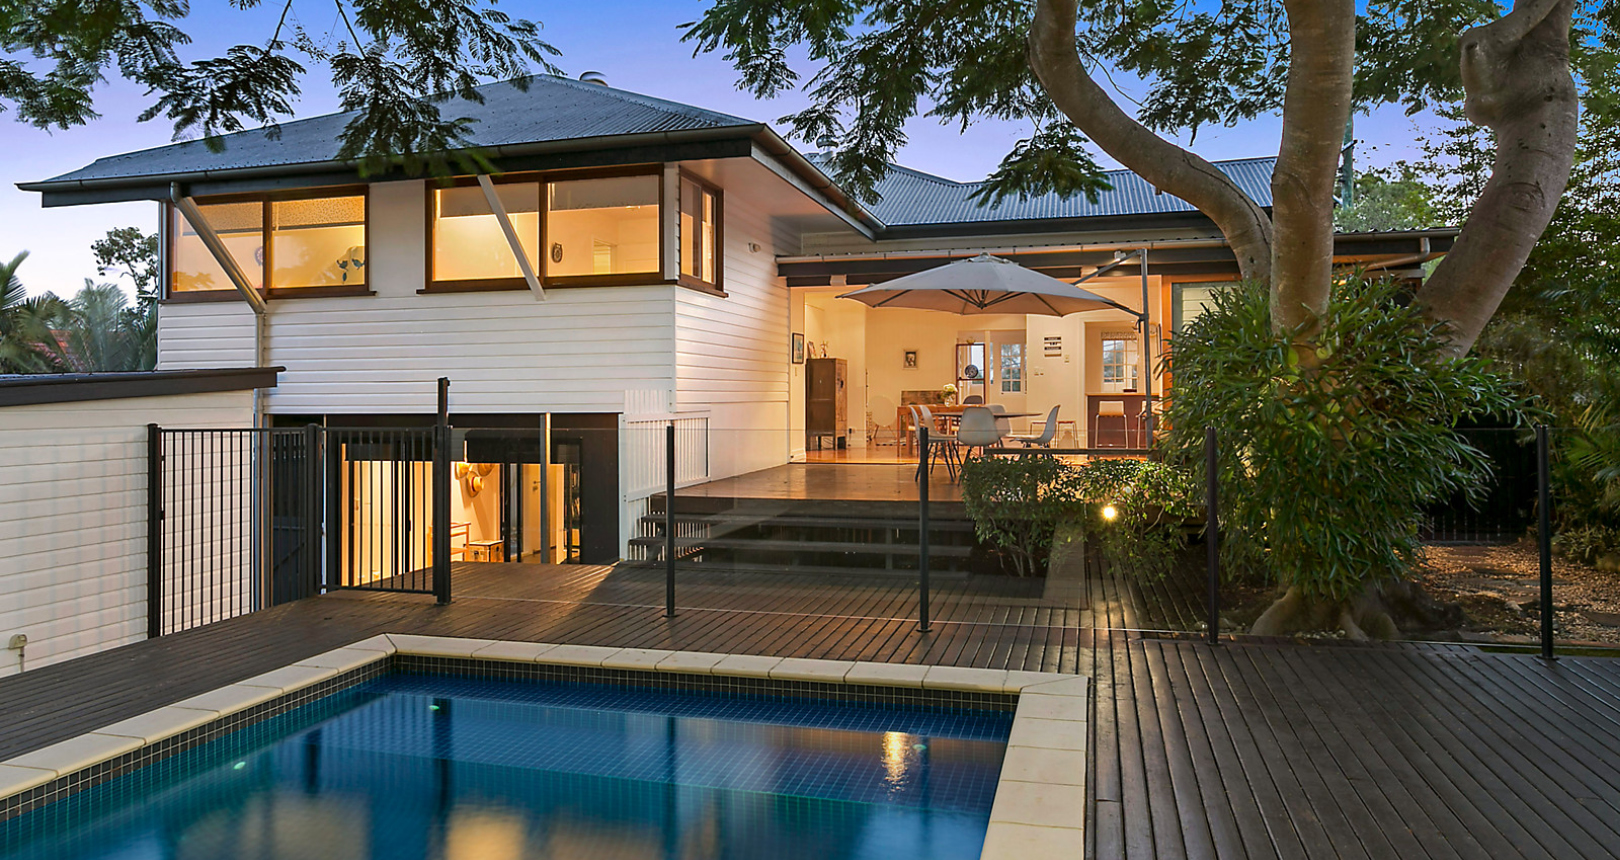 The most expensive homes in Brisbane’s inner-west